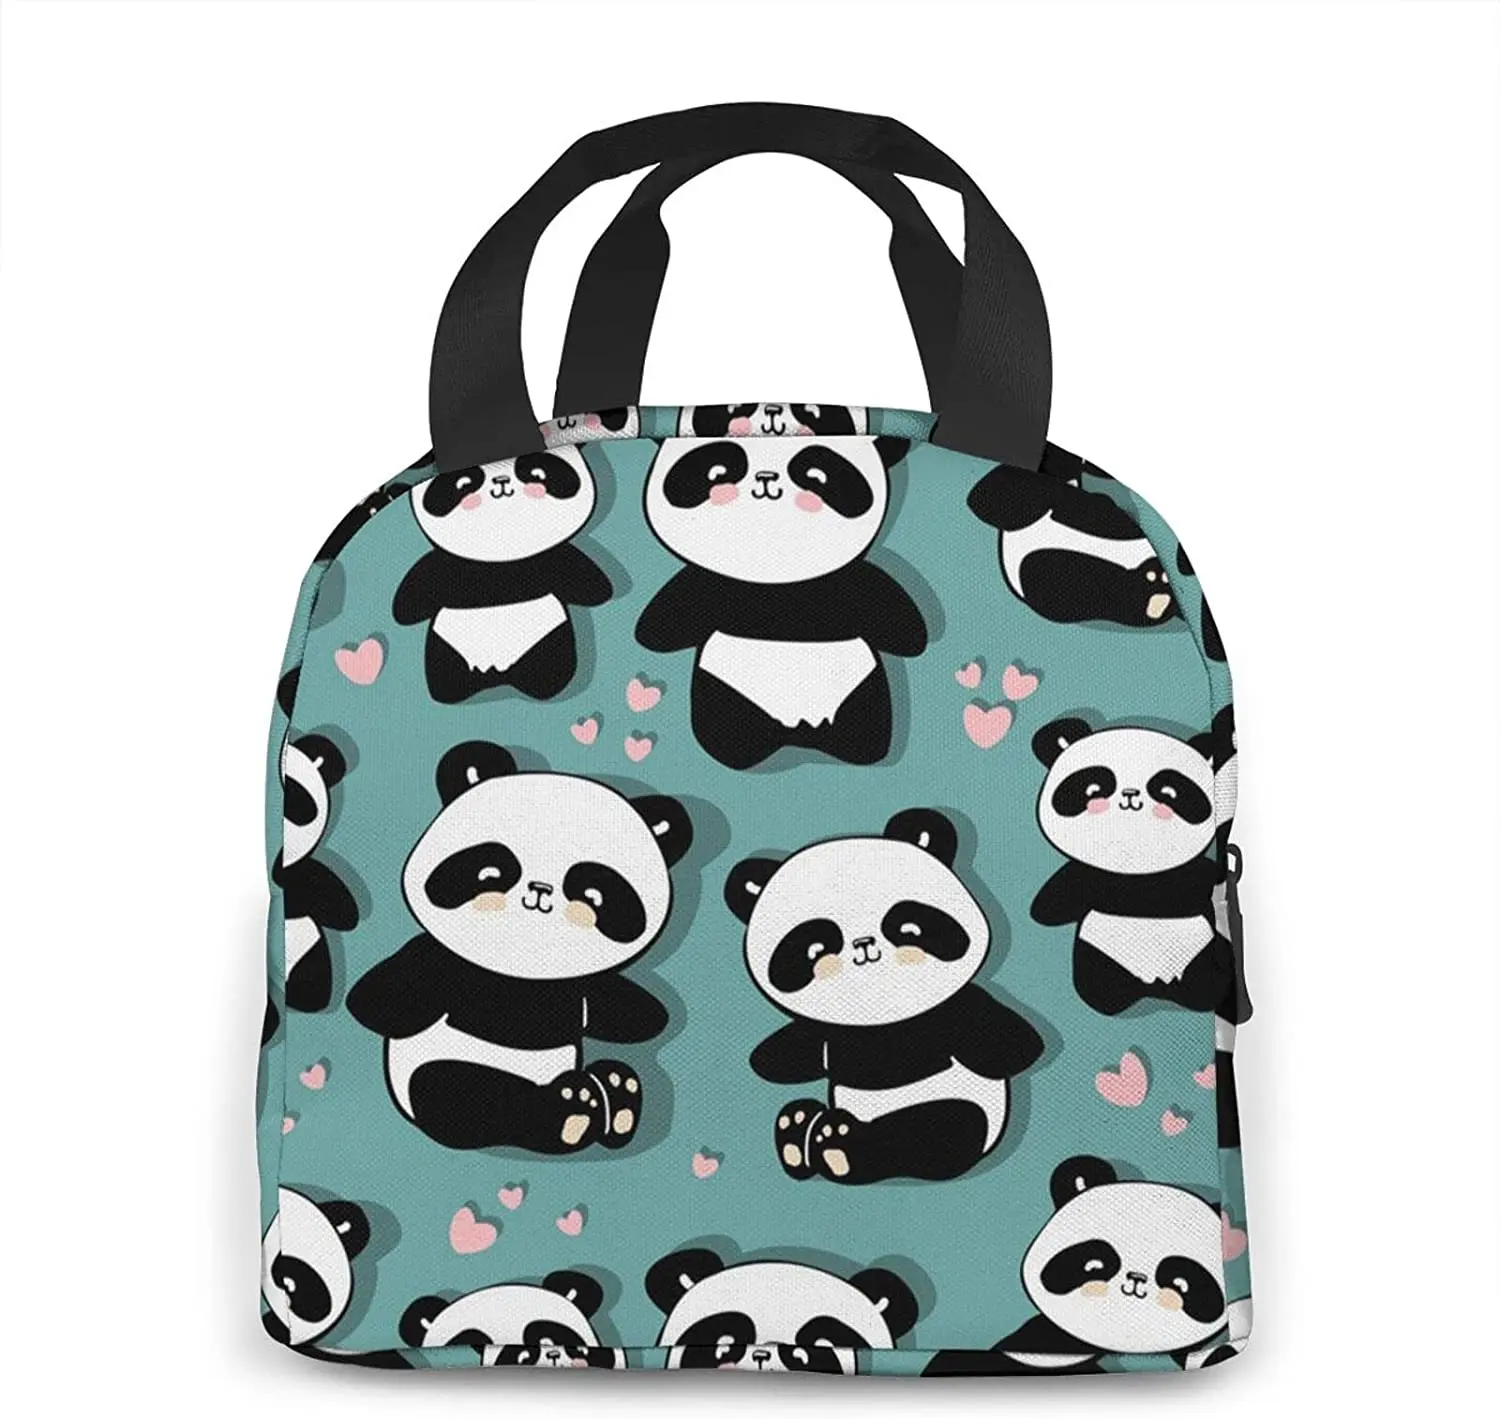  ATTX Cute Cat Panda Print Insulated Lunch Box Cooler Bag,  Portable Lunch Bag with Detachable Shoulder Strap for Women Mens Work Beach  Picnic: Home & Kitchen